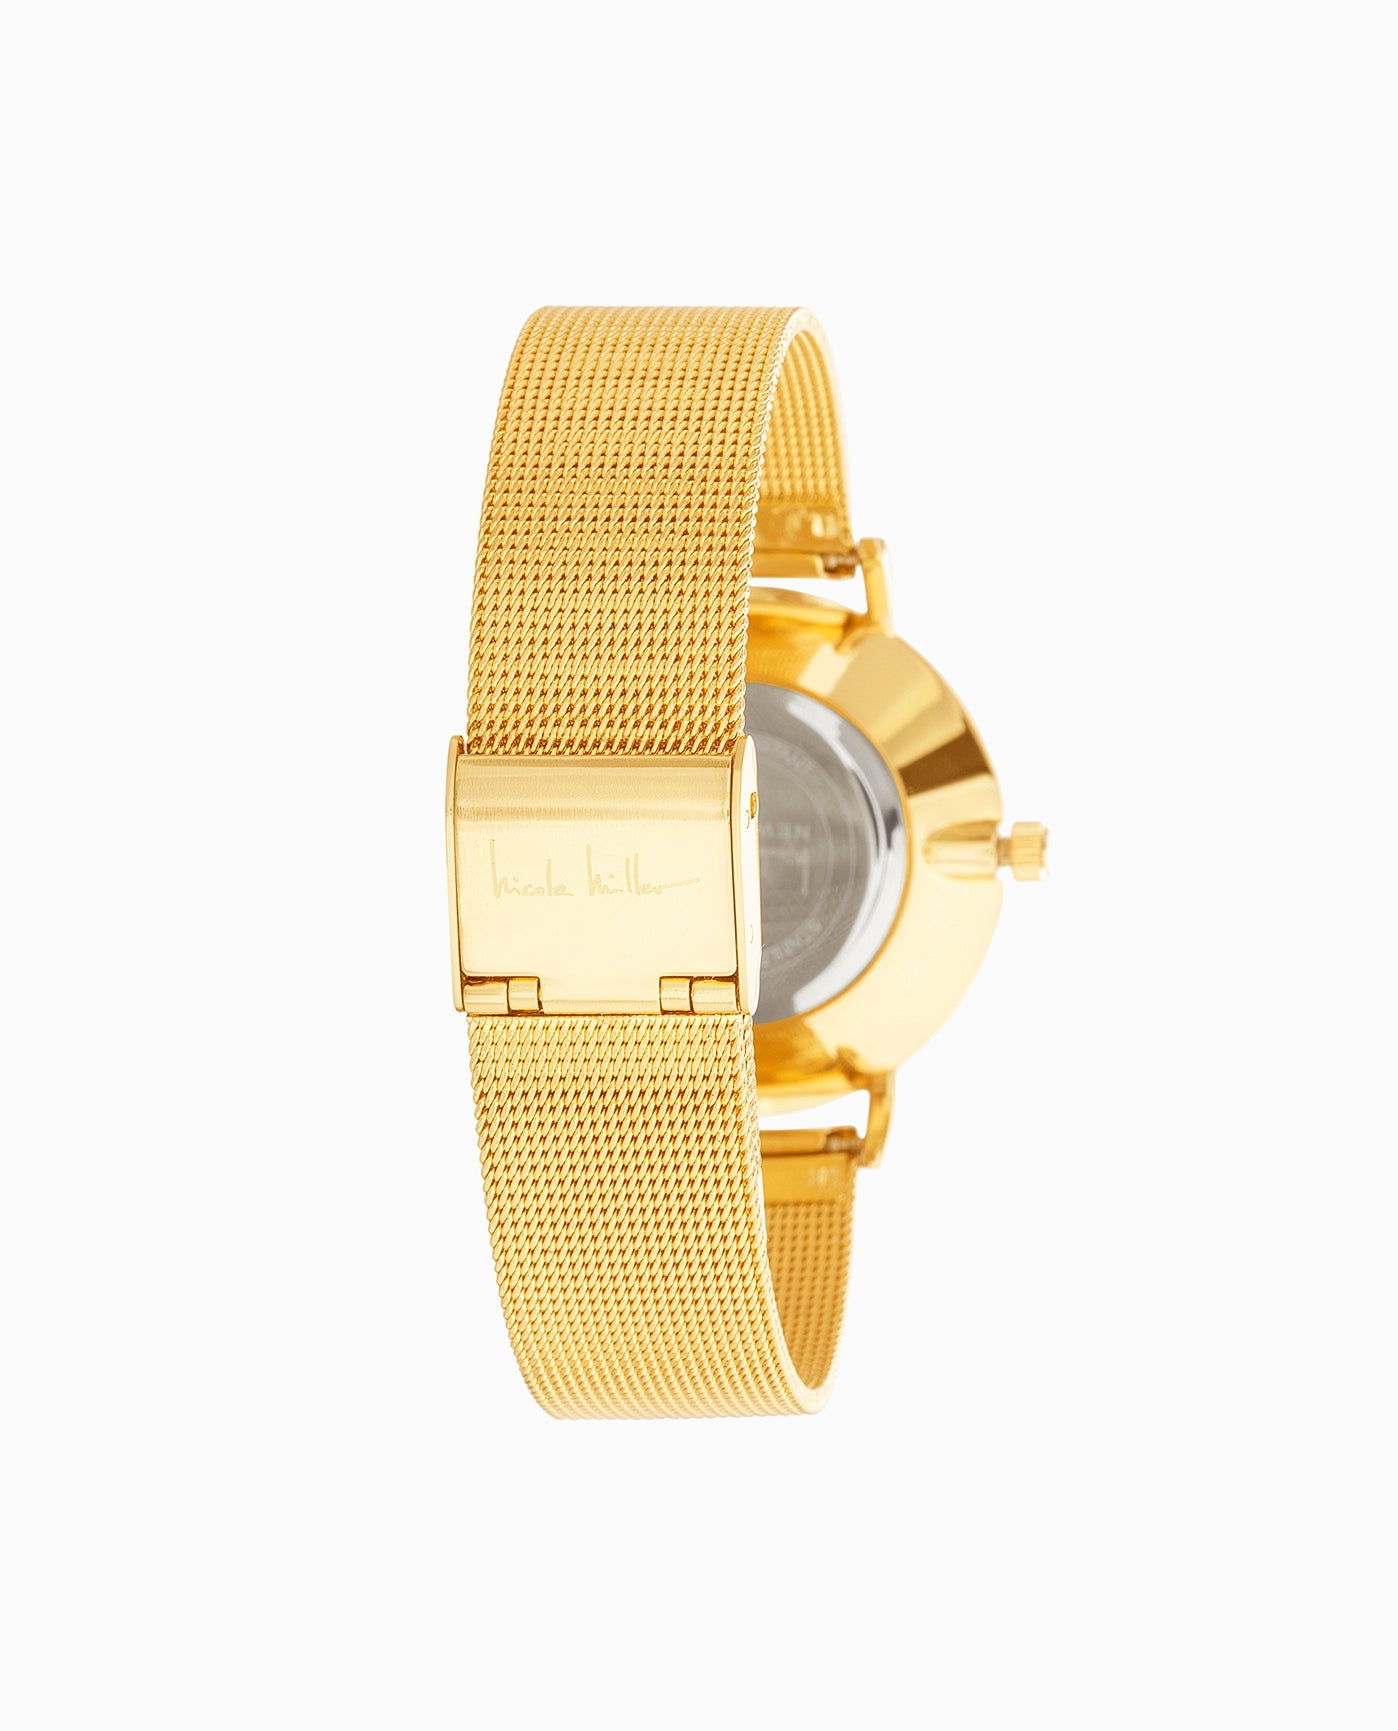 PINK/GOLD TONE STAINLESS STEEL BRACELET WATCH, 35mm BAND CLOSE UP | Gold And Pink